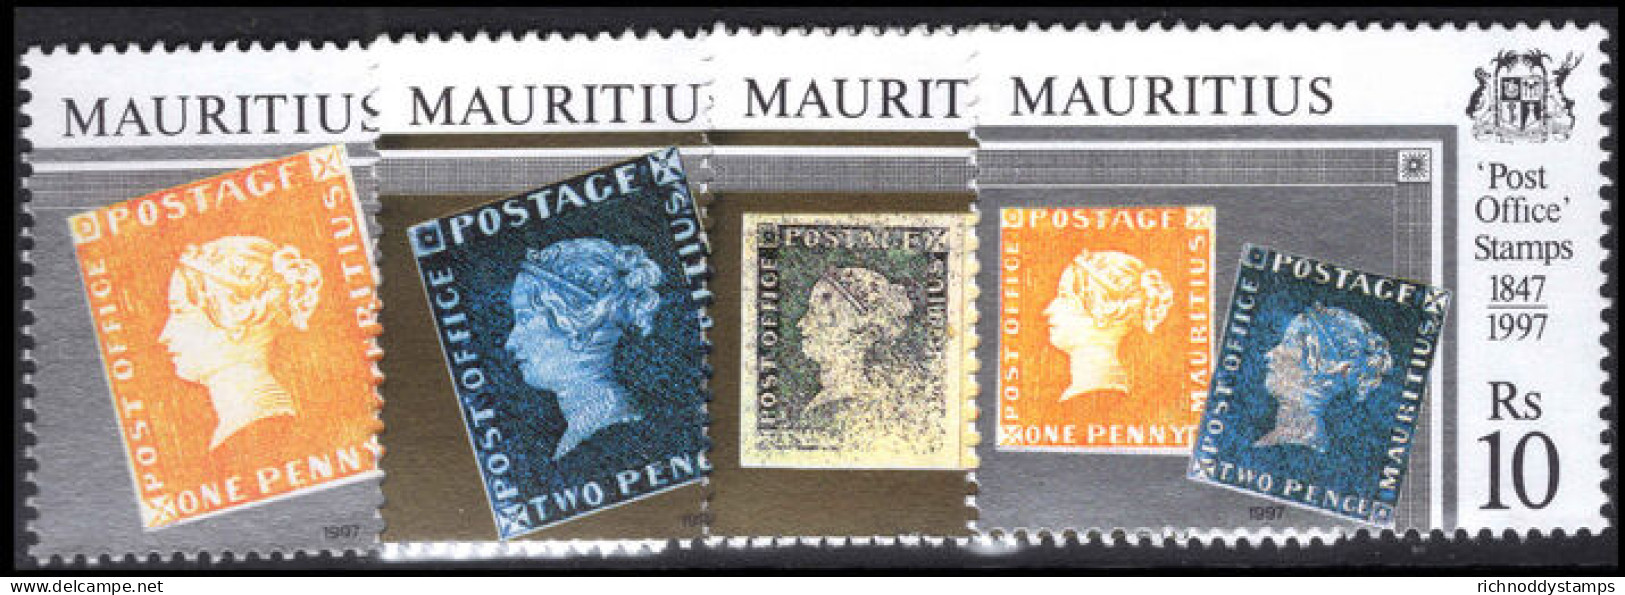 Mauritius 1997 150th Anniversary Of POST OFFICE Stamps Unmounted Mint. - Mauritius (1968-...)